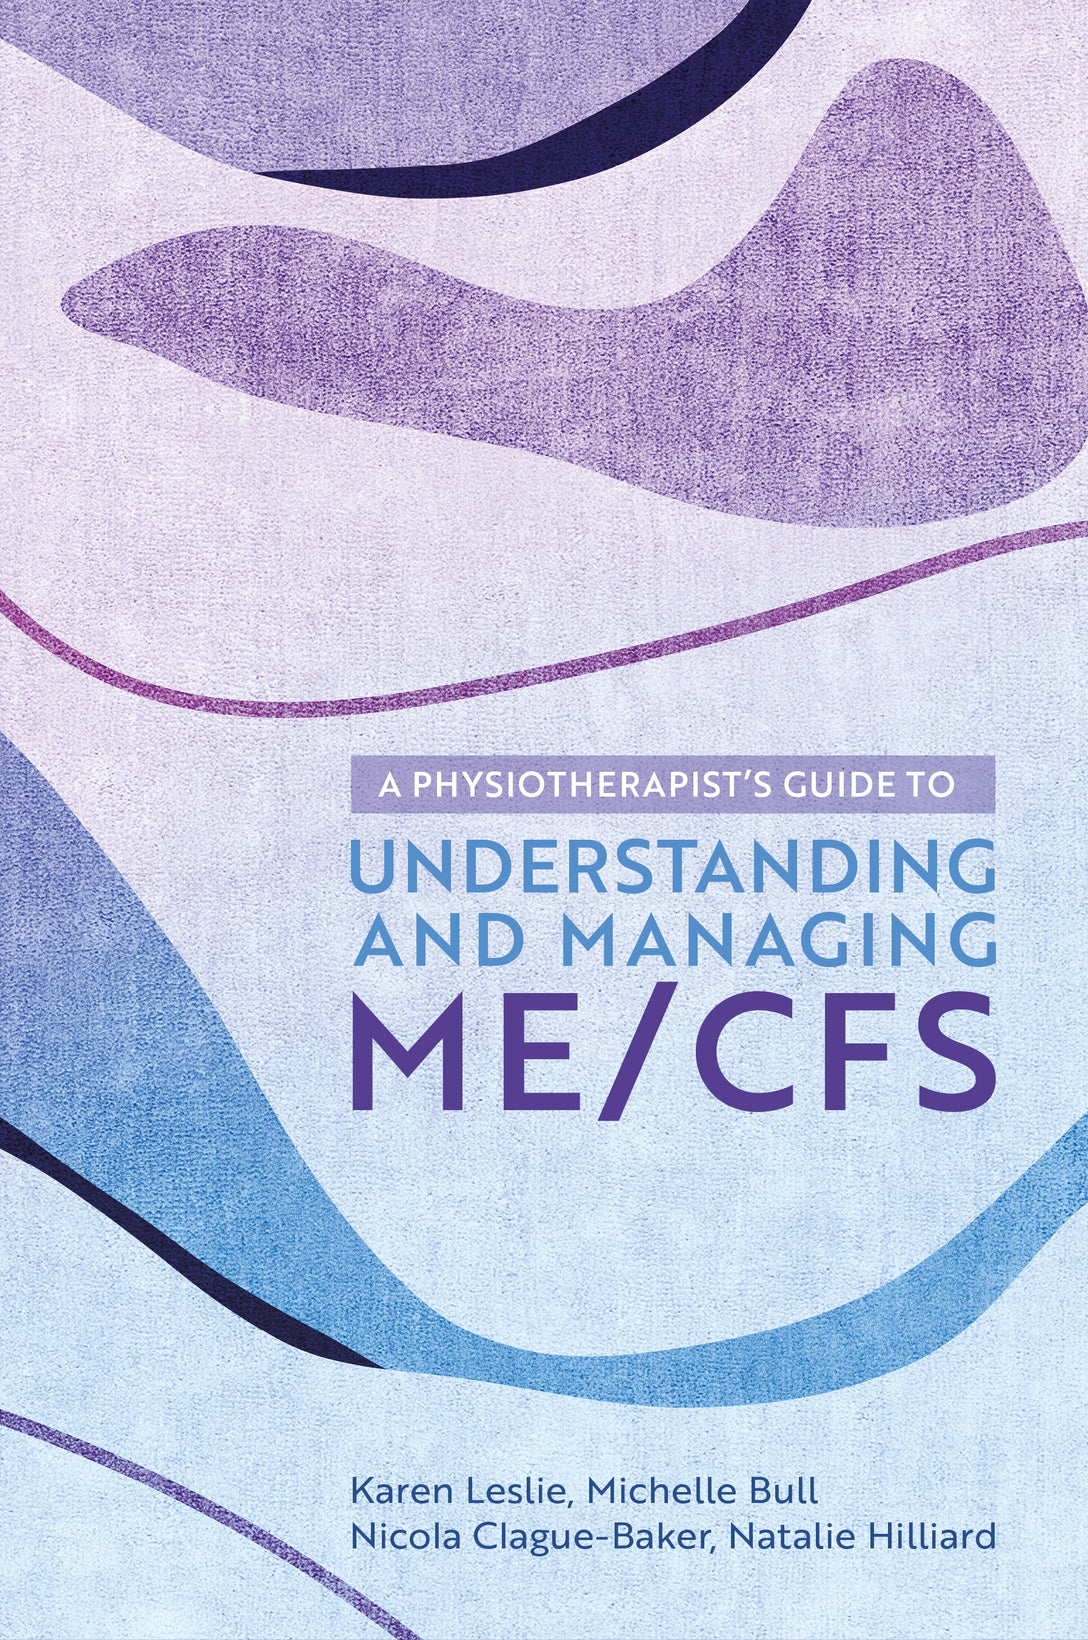 A Physiotherapist's Guide to Understanding and Managing ME/CFS by Michelle Bull, Karen Leslie, Nicola Clague-Baker, Natalie Hilliard